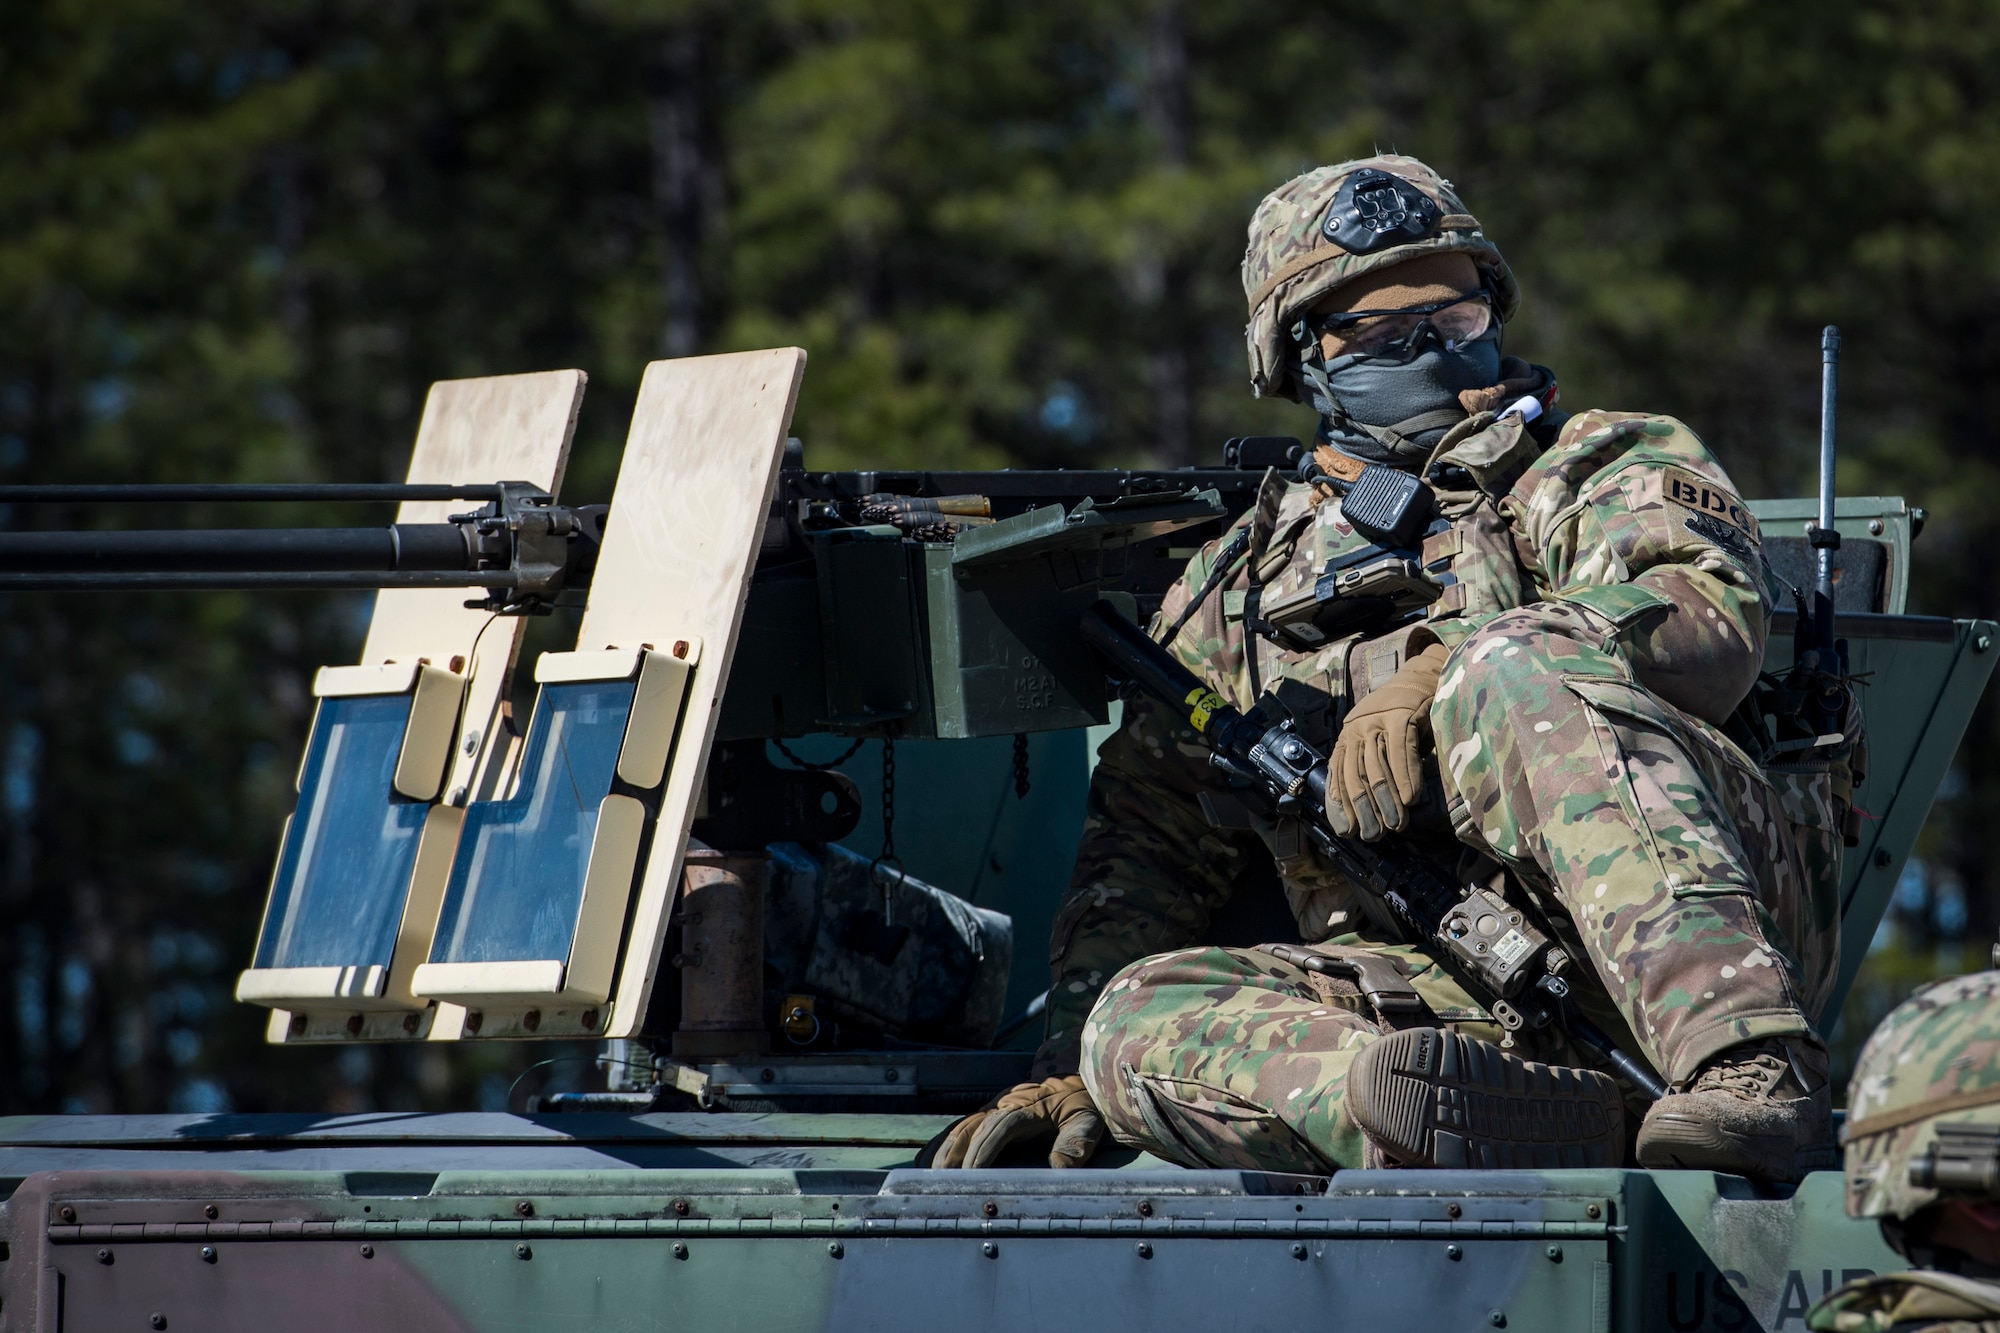 Airman 1st Class Devin Brown, 824th Base Defense Squadron fireteam member, sits on a Humvee during a Mission Readiness Exercise, March 13, 2018, at Joint Base McGuire-Dix Lakehurst, N.J. Evaluators tested the 824th BDS from Moody Air Force Base, Ga., and the 105th Security Forces Squadron from Stewart Air National Guard Base, N.Y., to ensure their combat readiness. (U.S. Air Force photo by Senior Airman Janiqua P. Robinson)